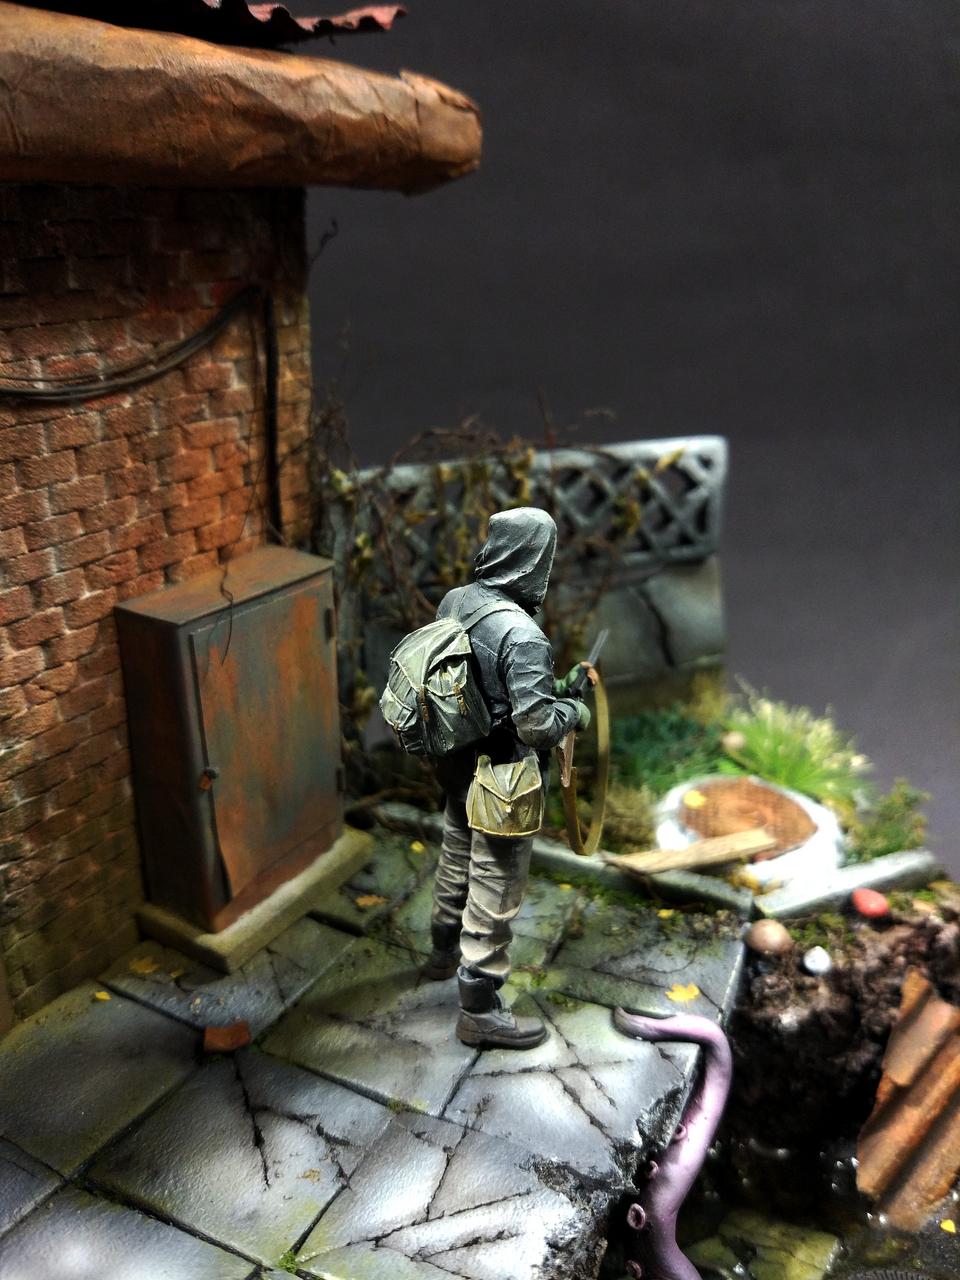 Dioramas and Vignettes: New undiscovered world, photo #9